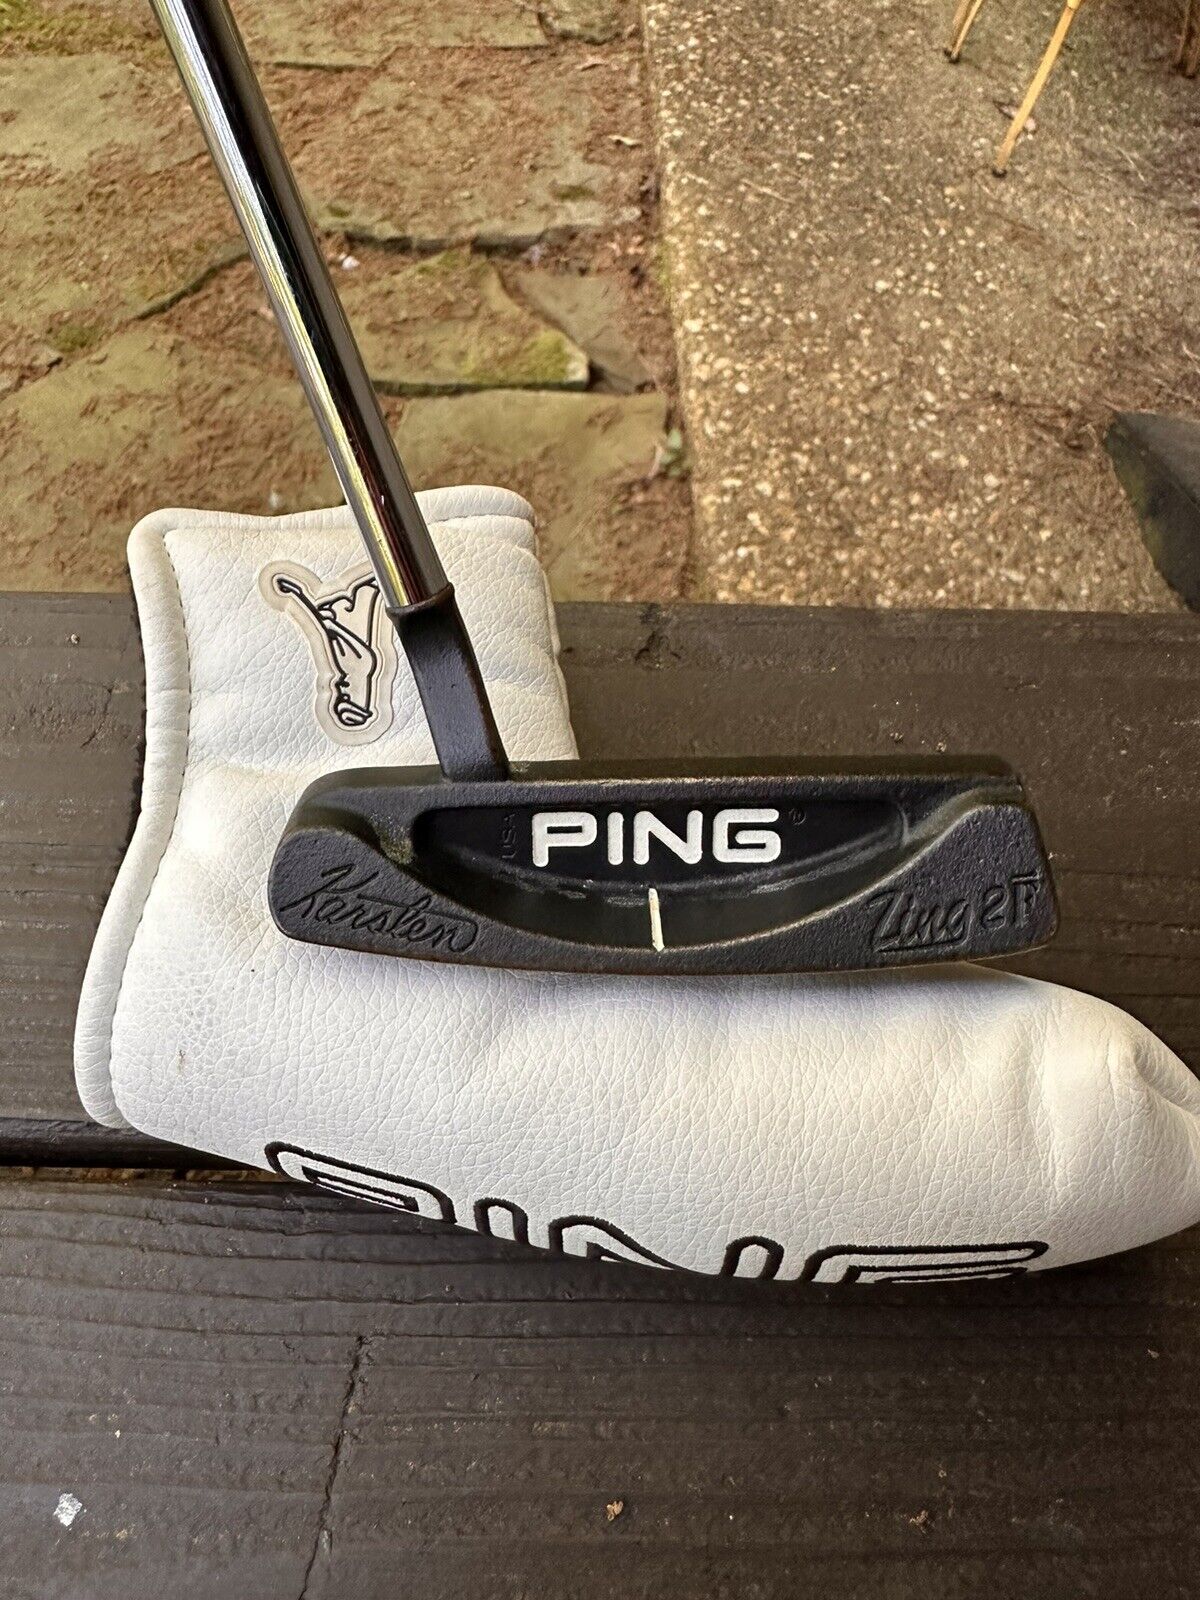 Ping Iso Force Karsten Zing 2F Foil Face Putter 36” RH w Headcover SUPERB 